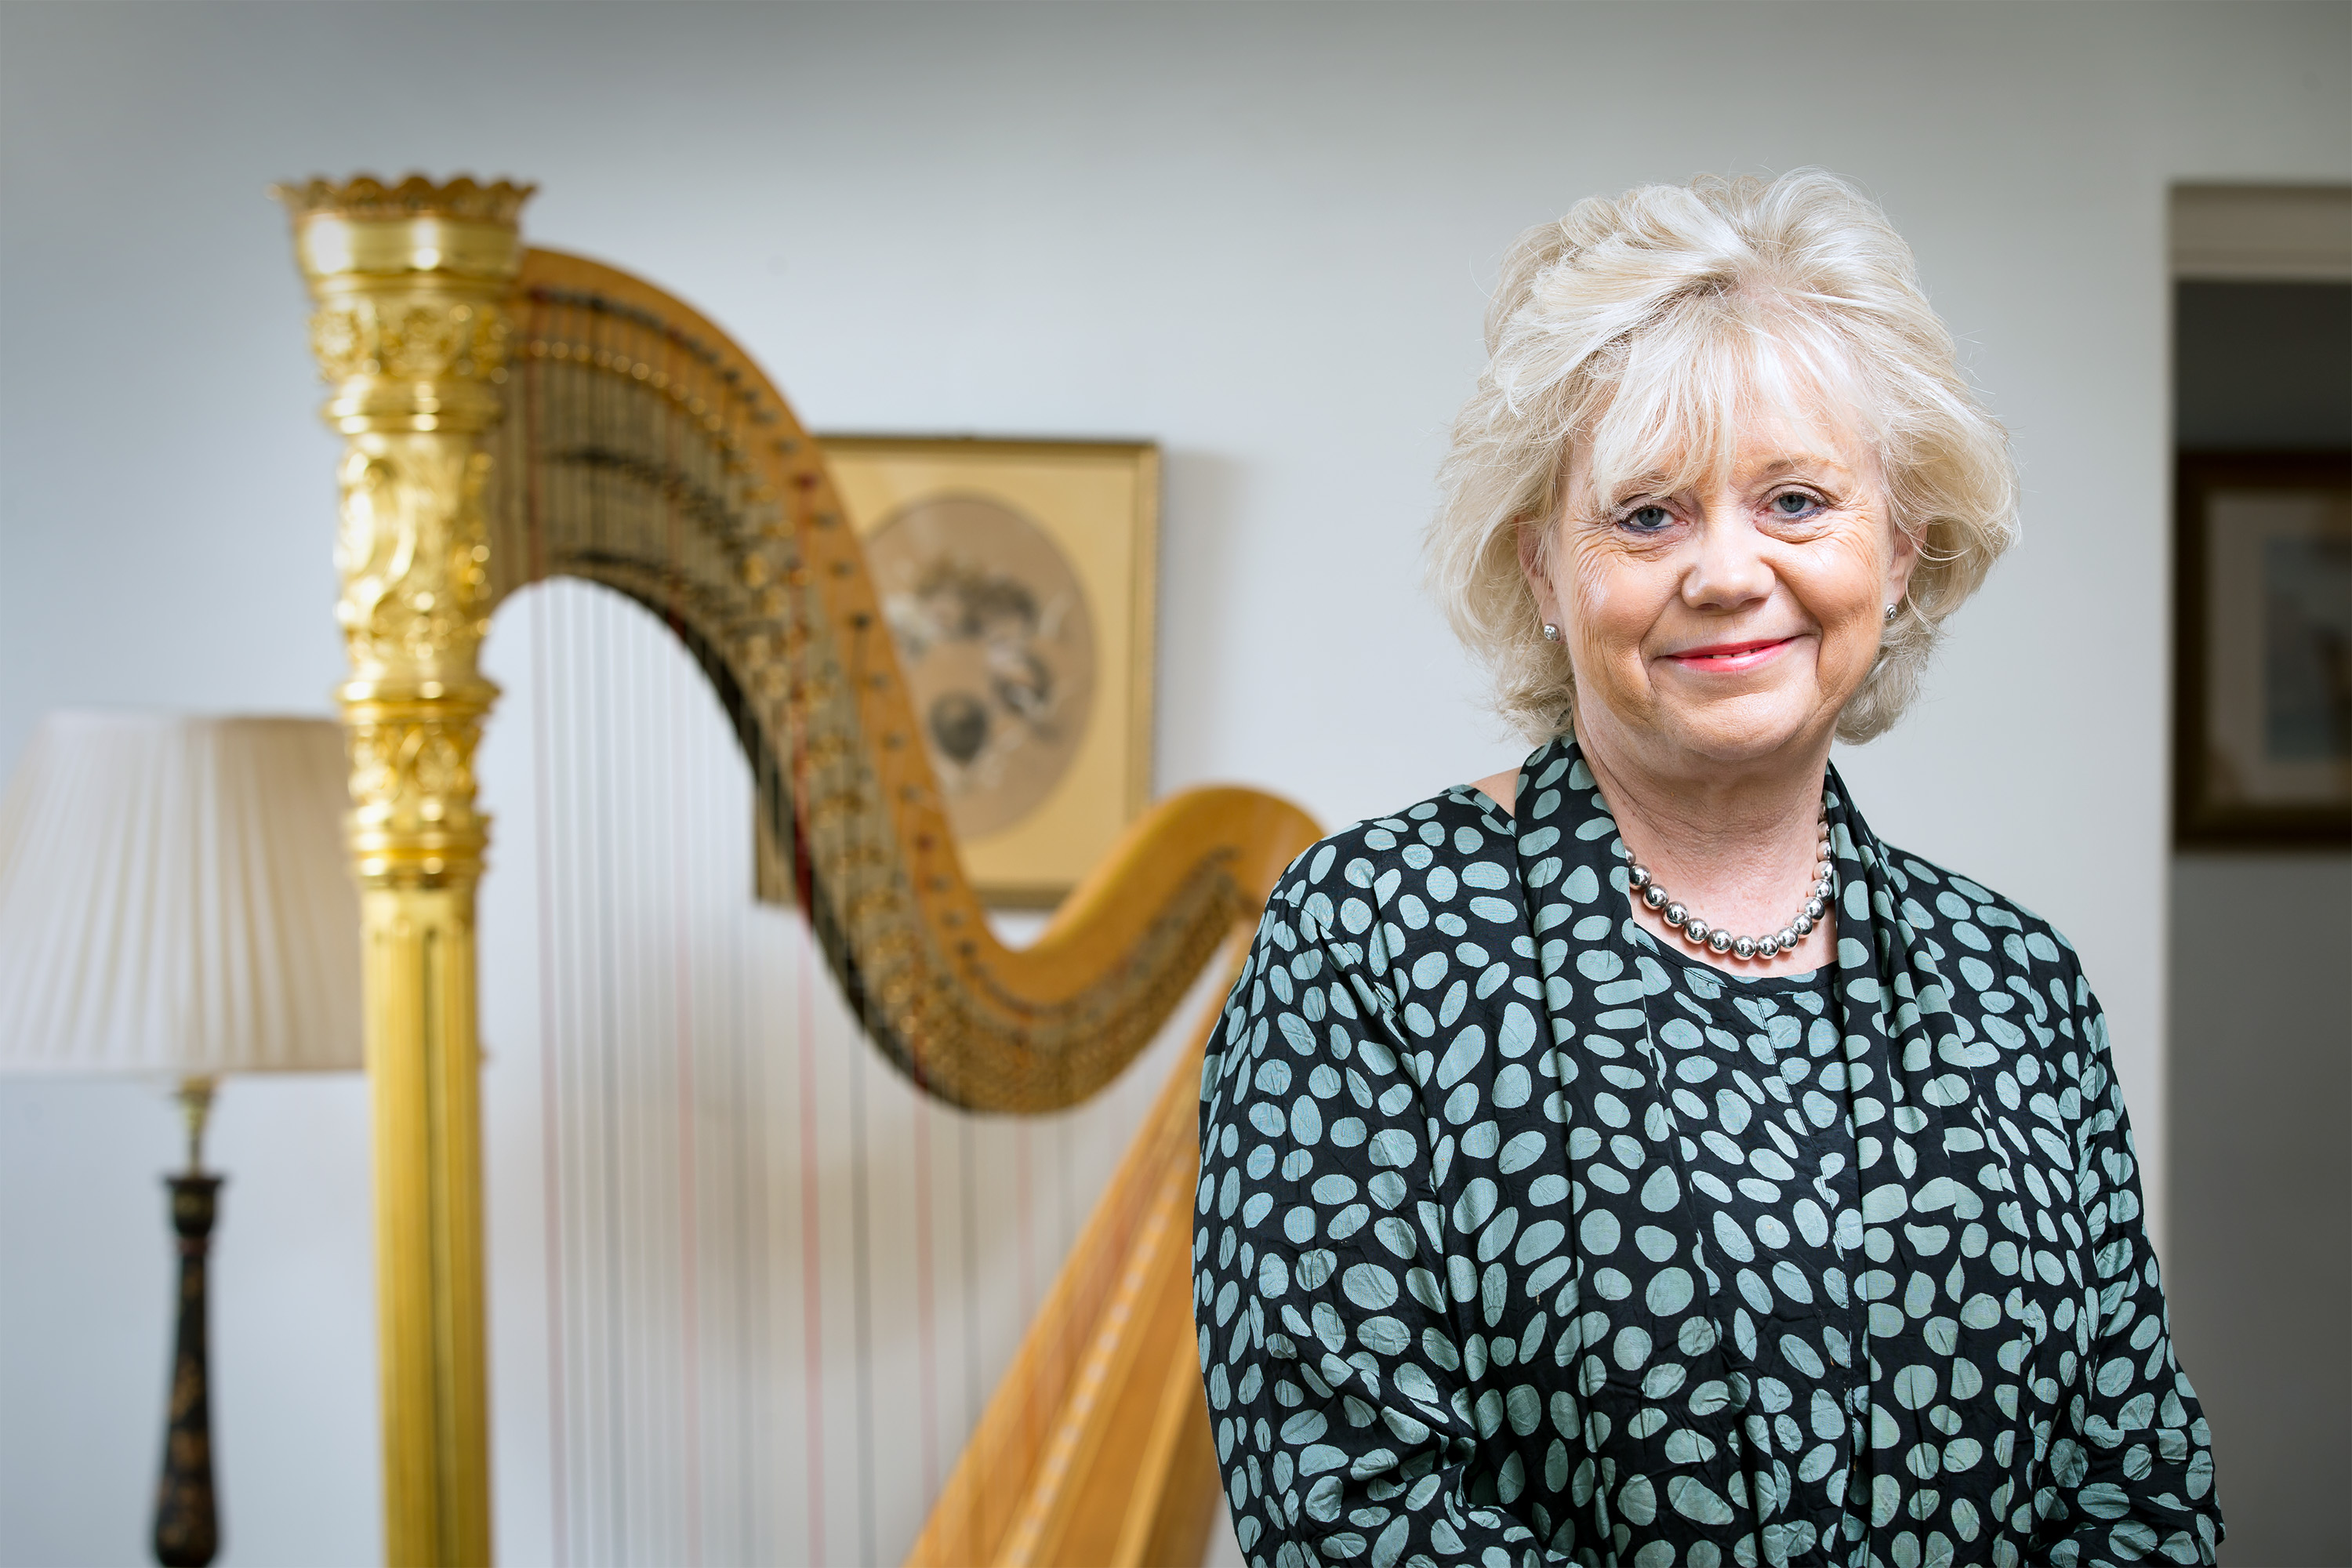 Gillian lands special award for years of orchestrating live music in care homes